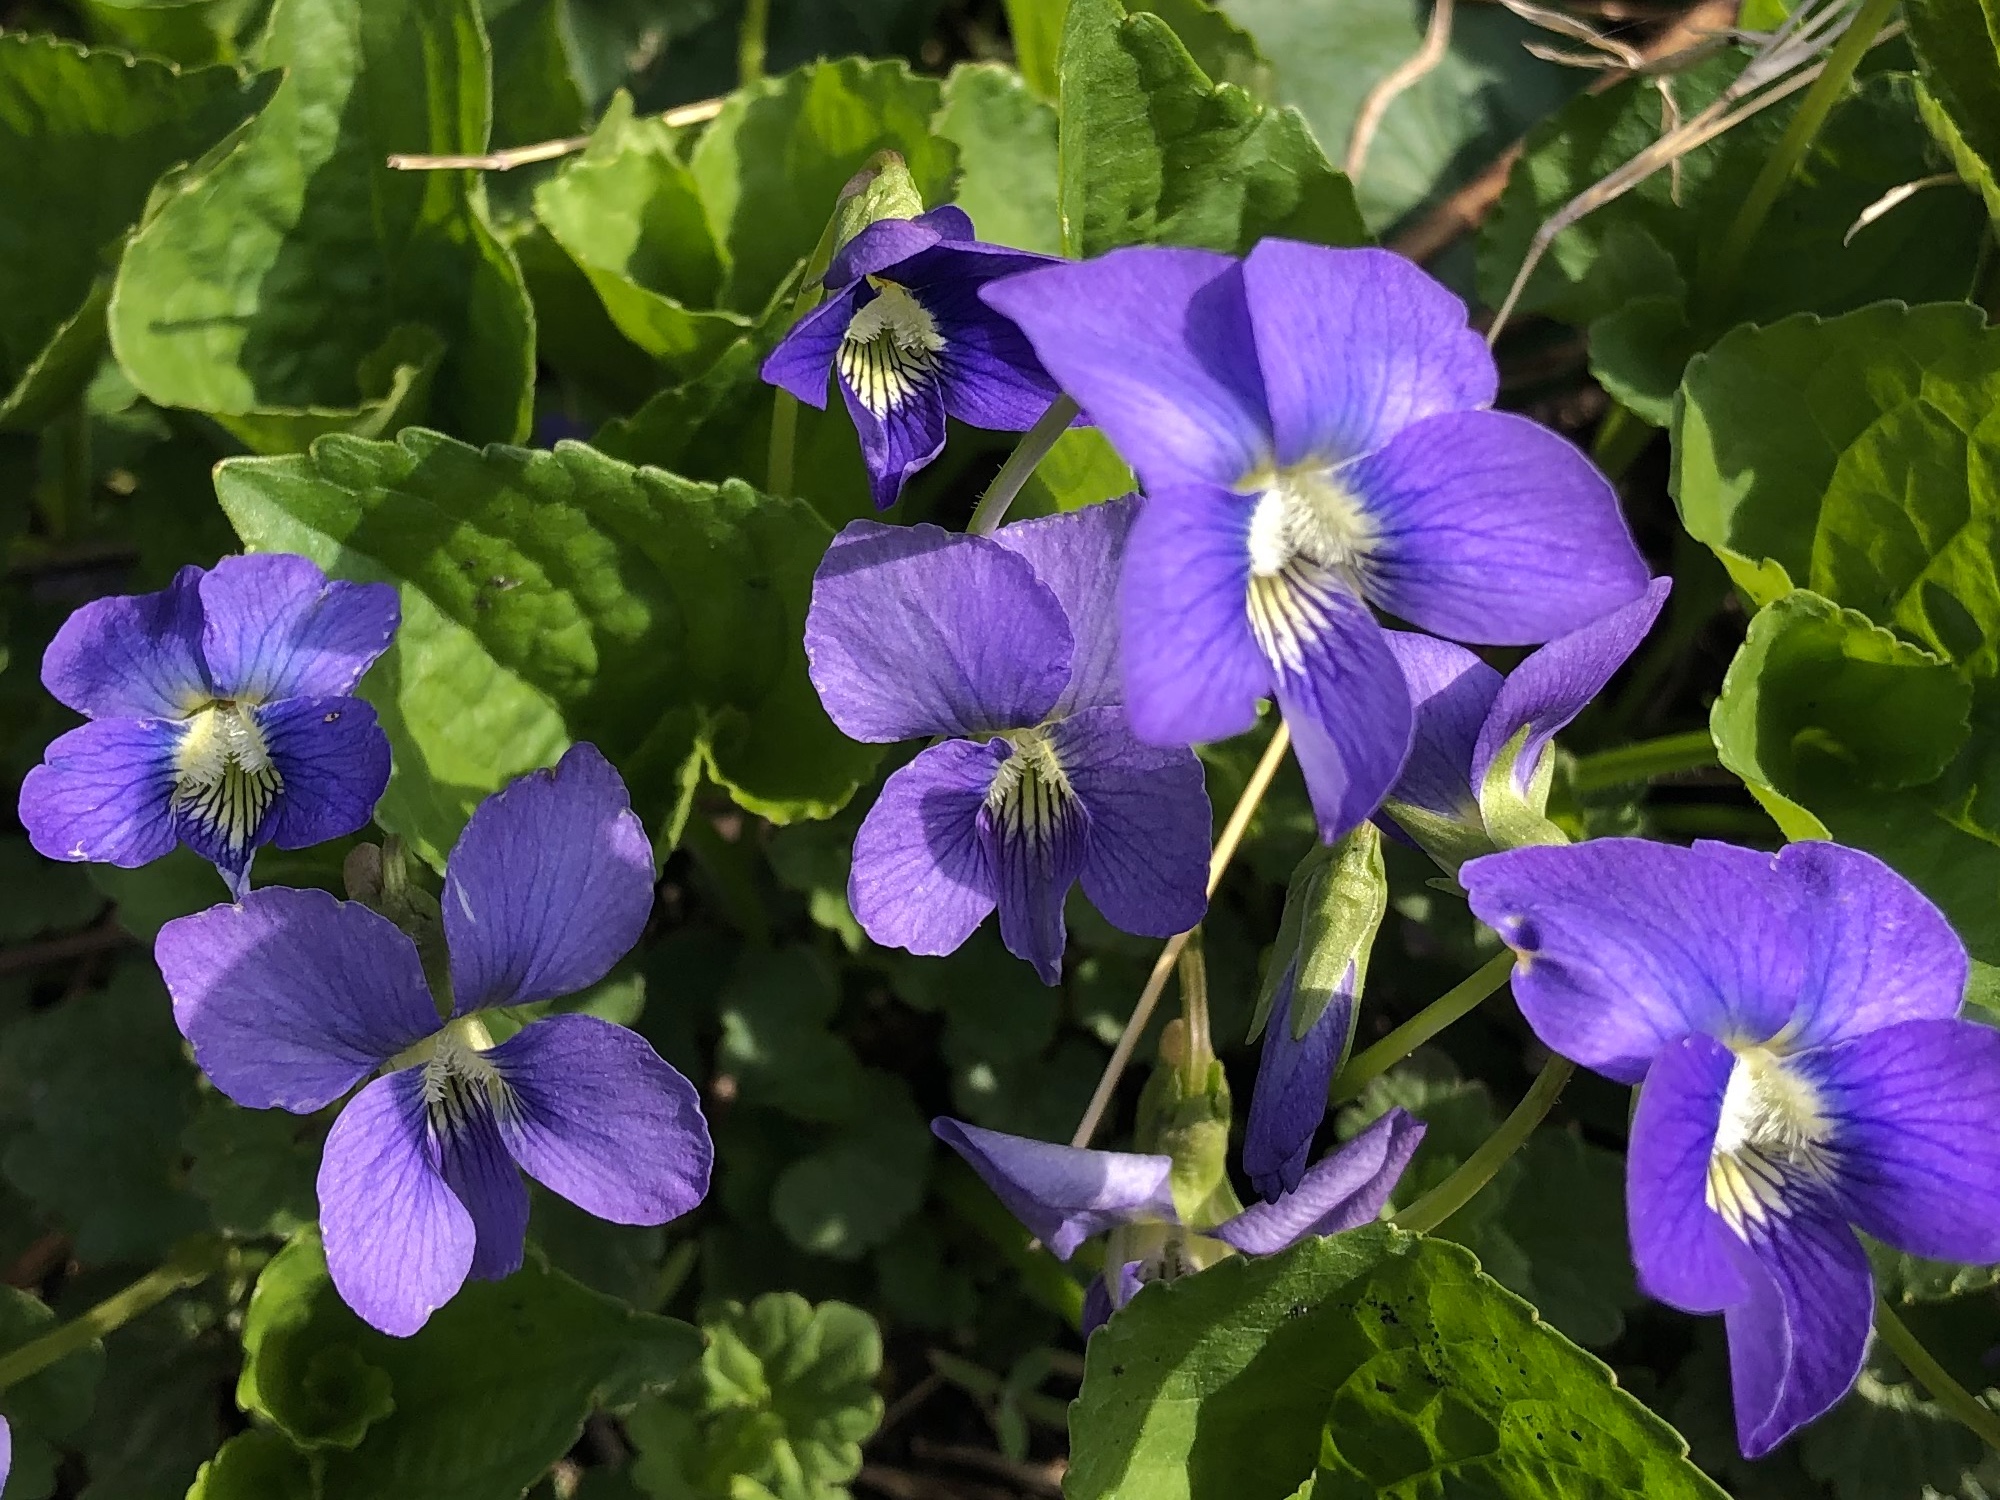 Wood Violets near the Duck Pond on April 25, 2019.